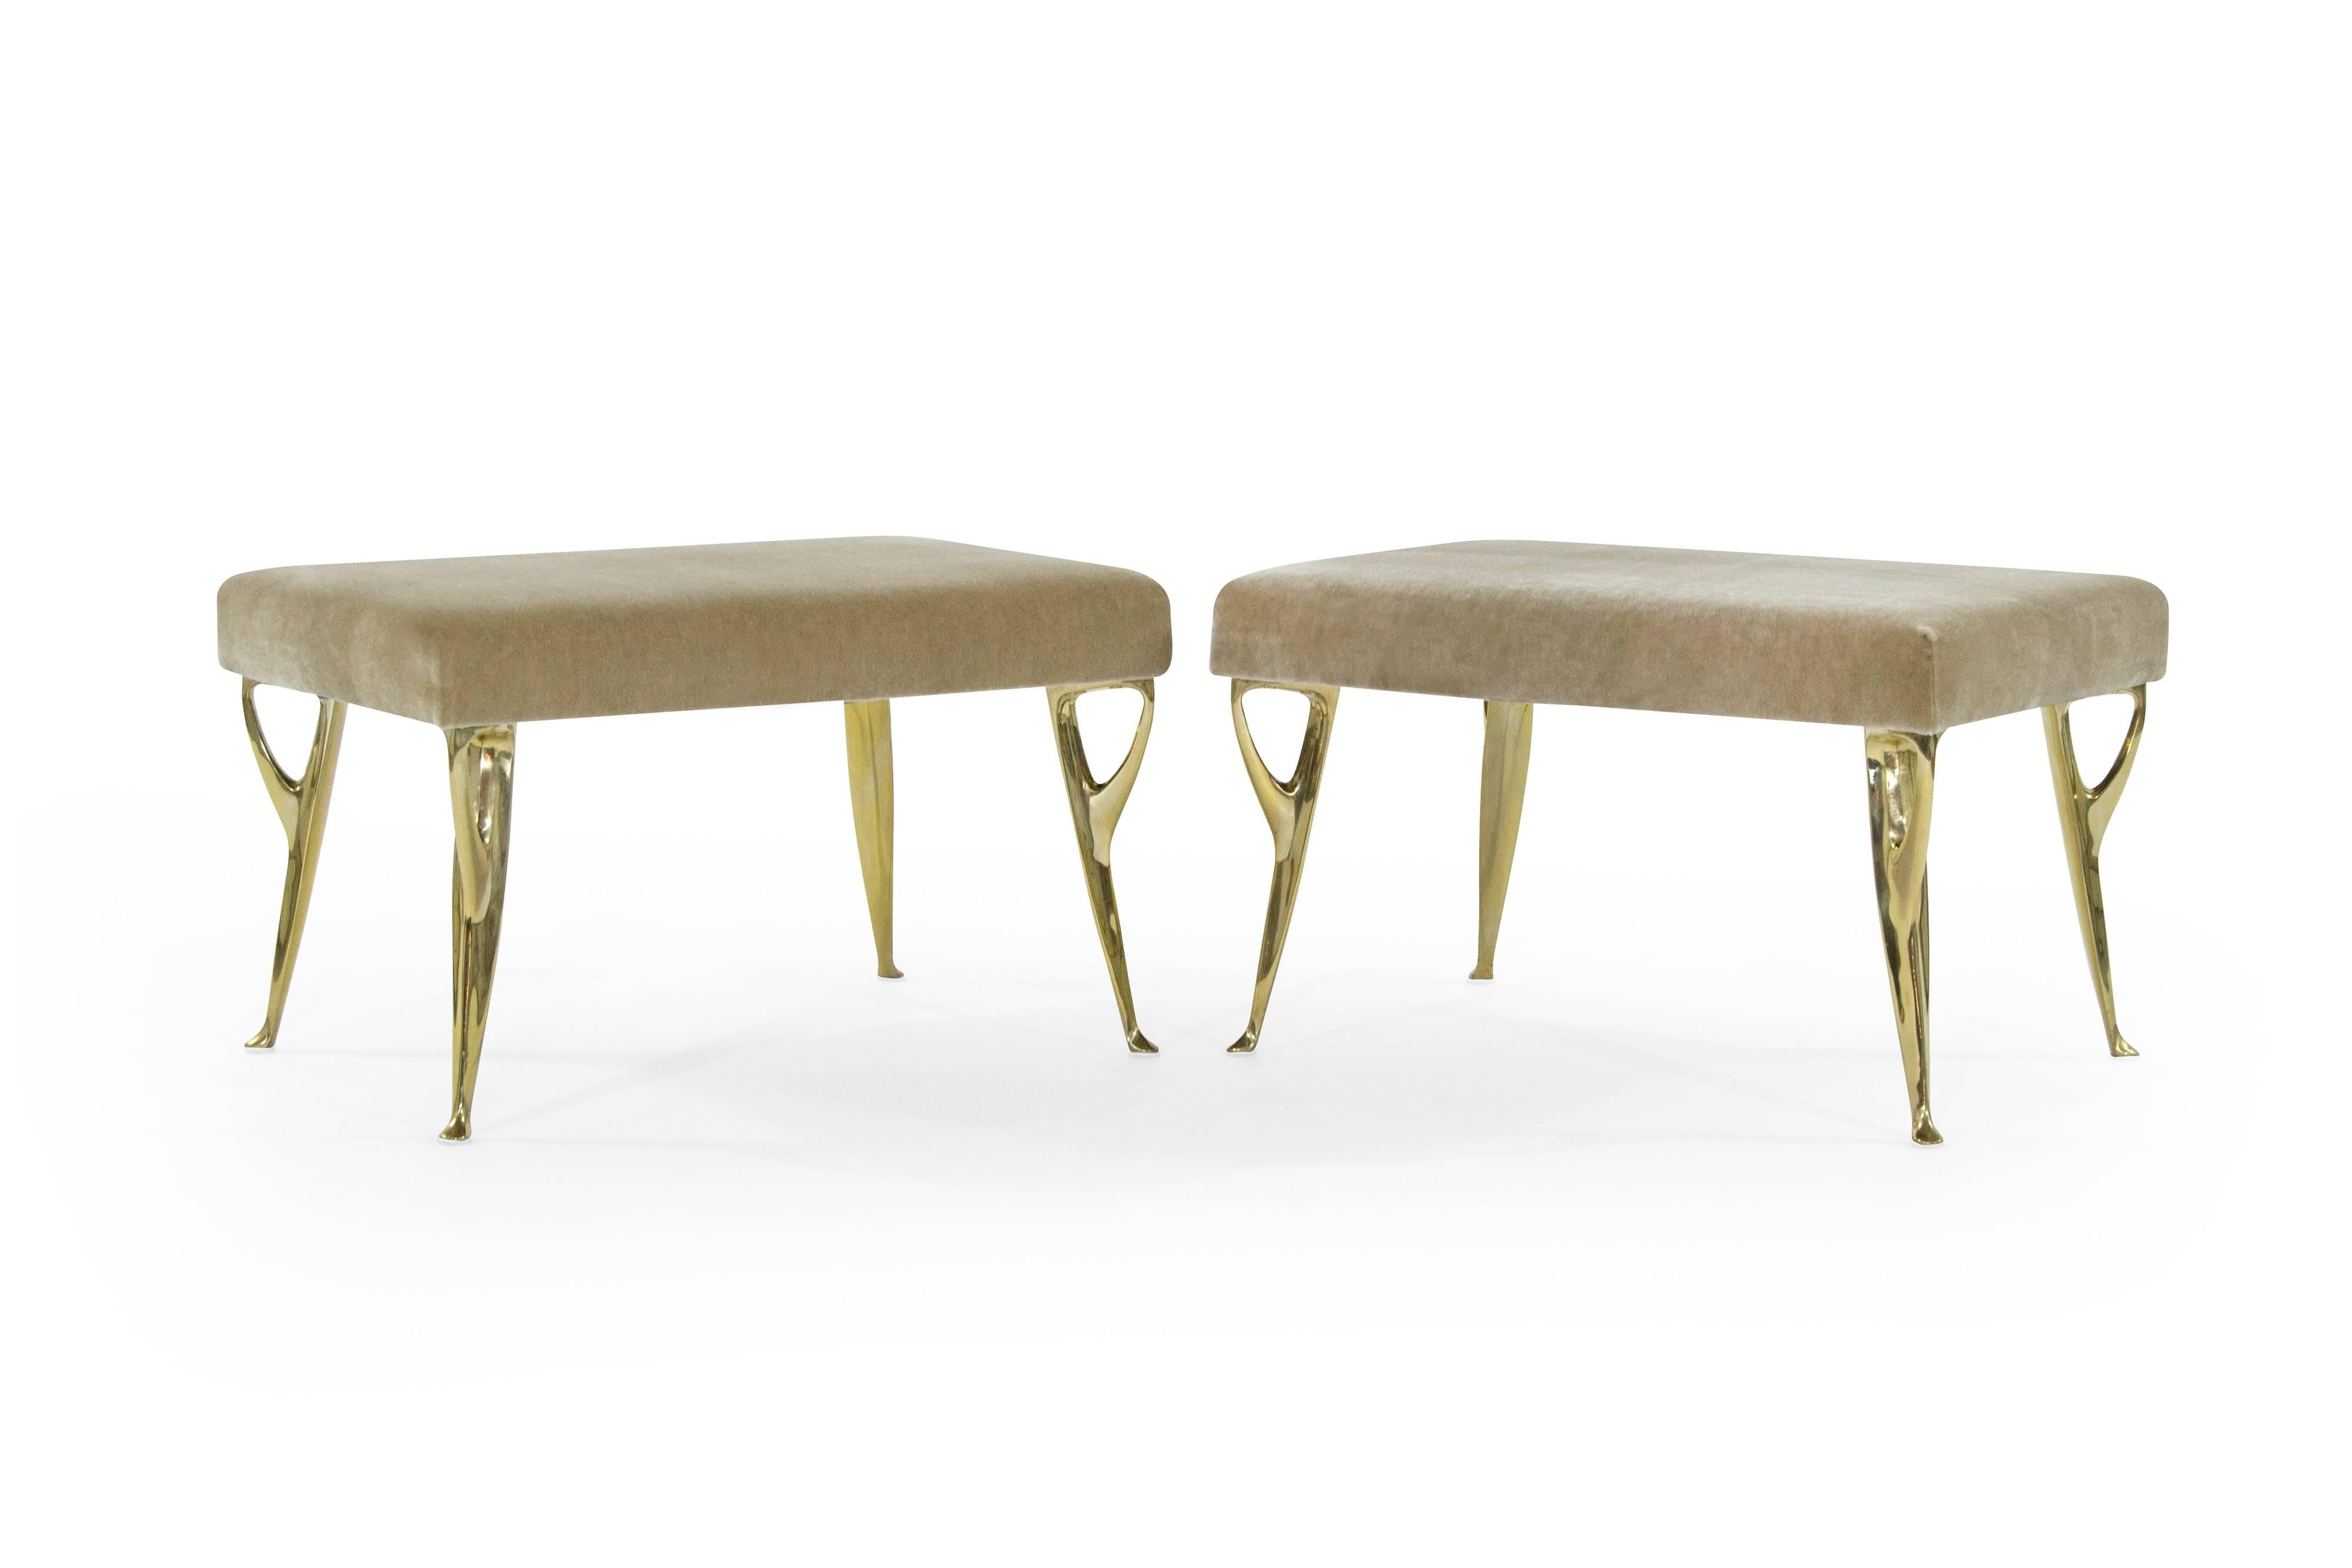 Set of Italian benches or stools newly upholstered in mohair, circa 1950s.
Organically designed brass legs newly polished. Priced individually.